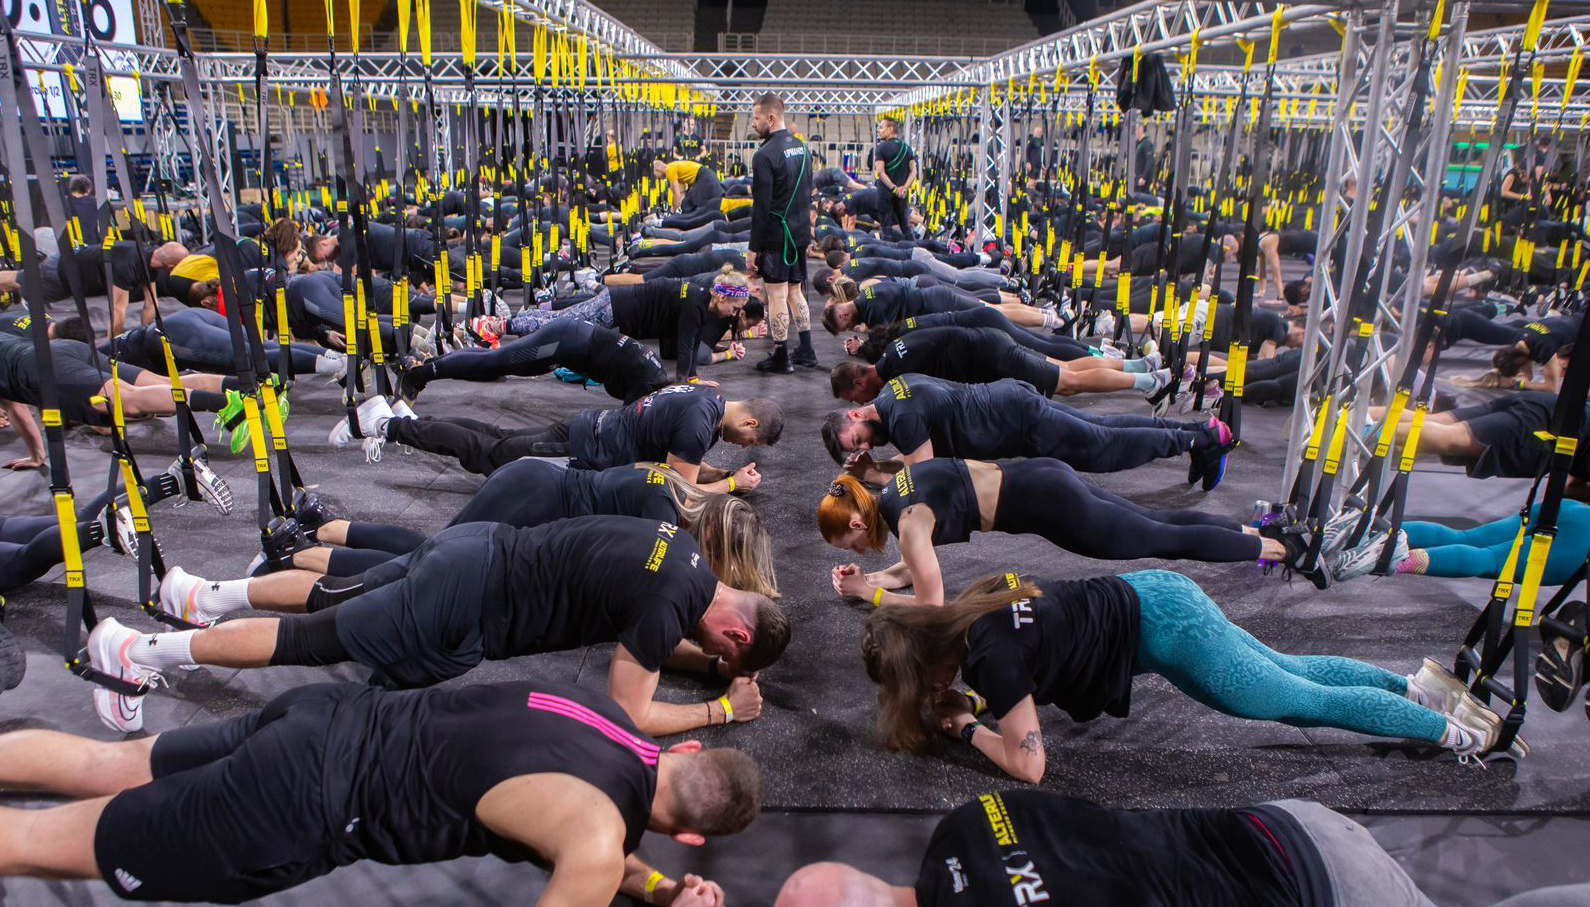 TRX Breaks Guinness World Record for Largest Suspension Training